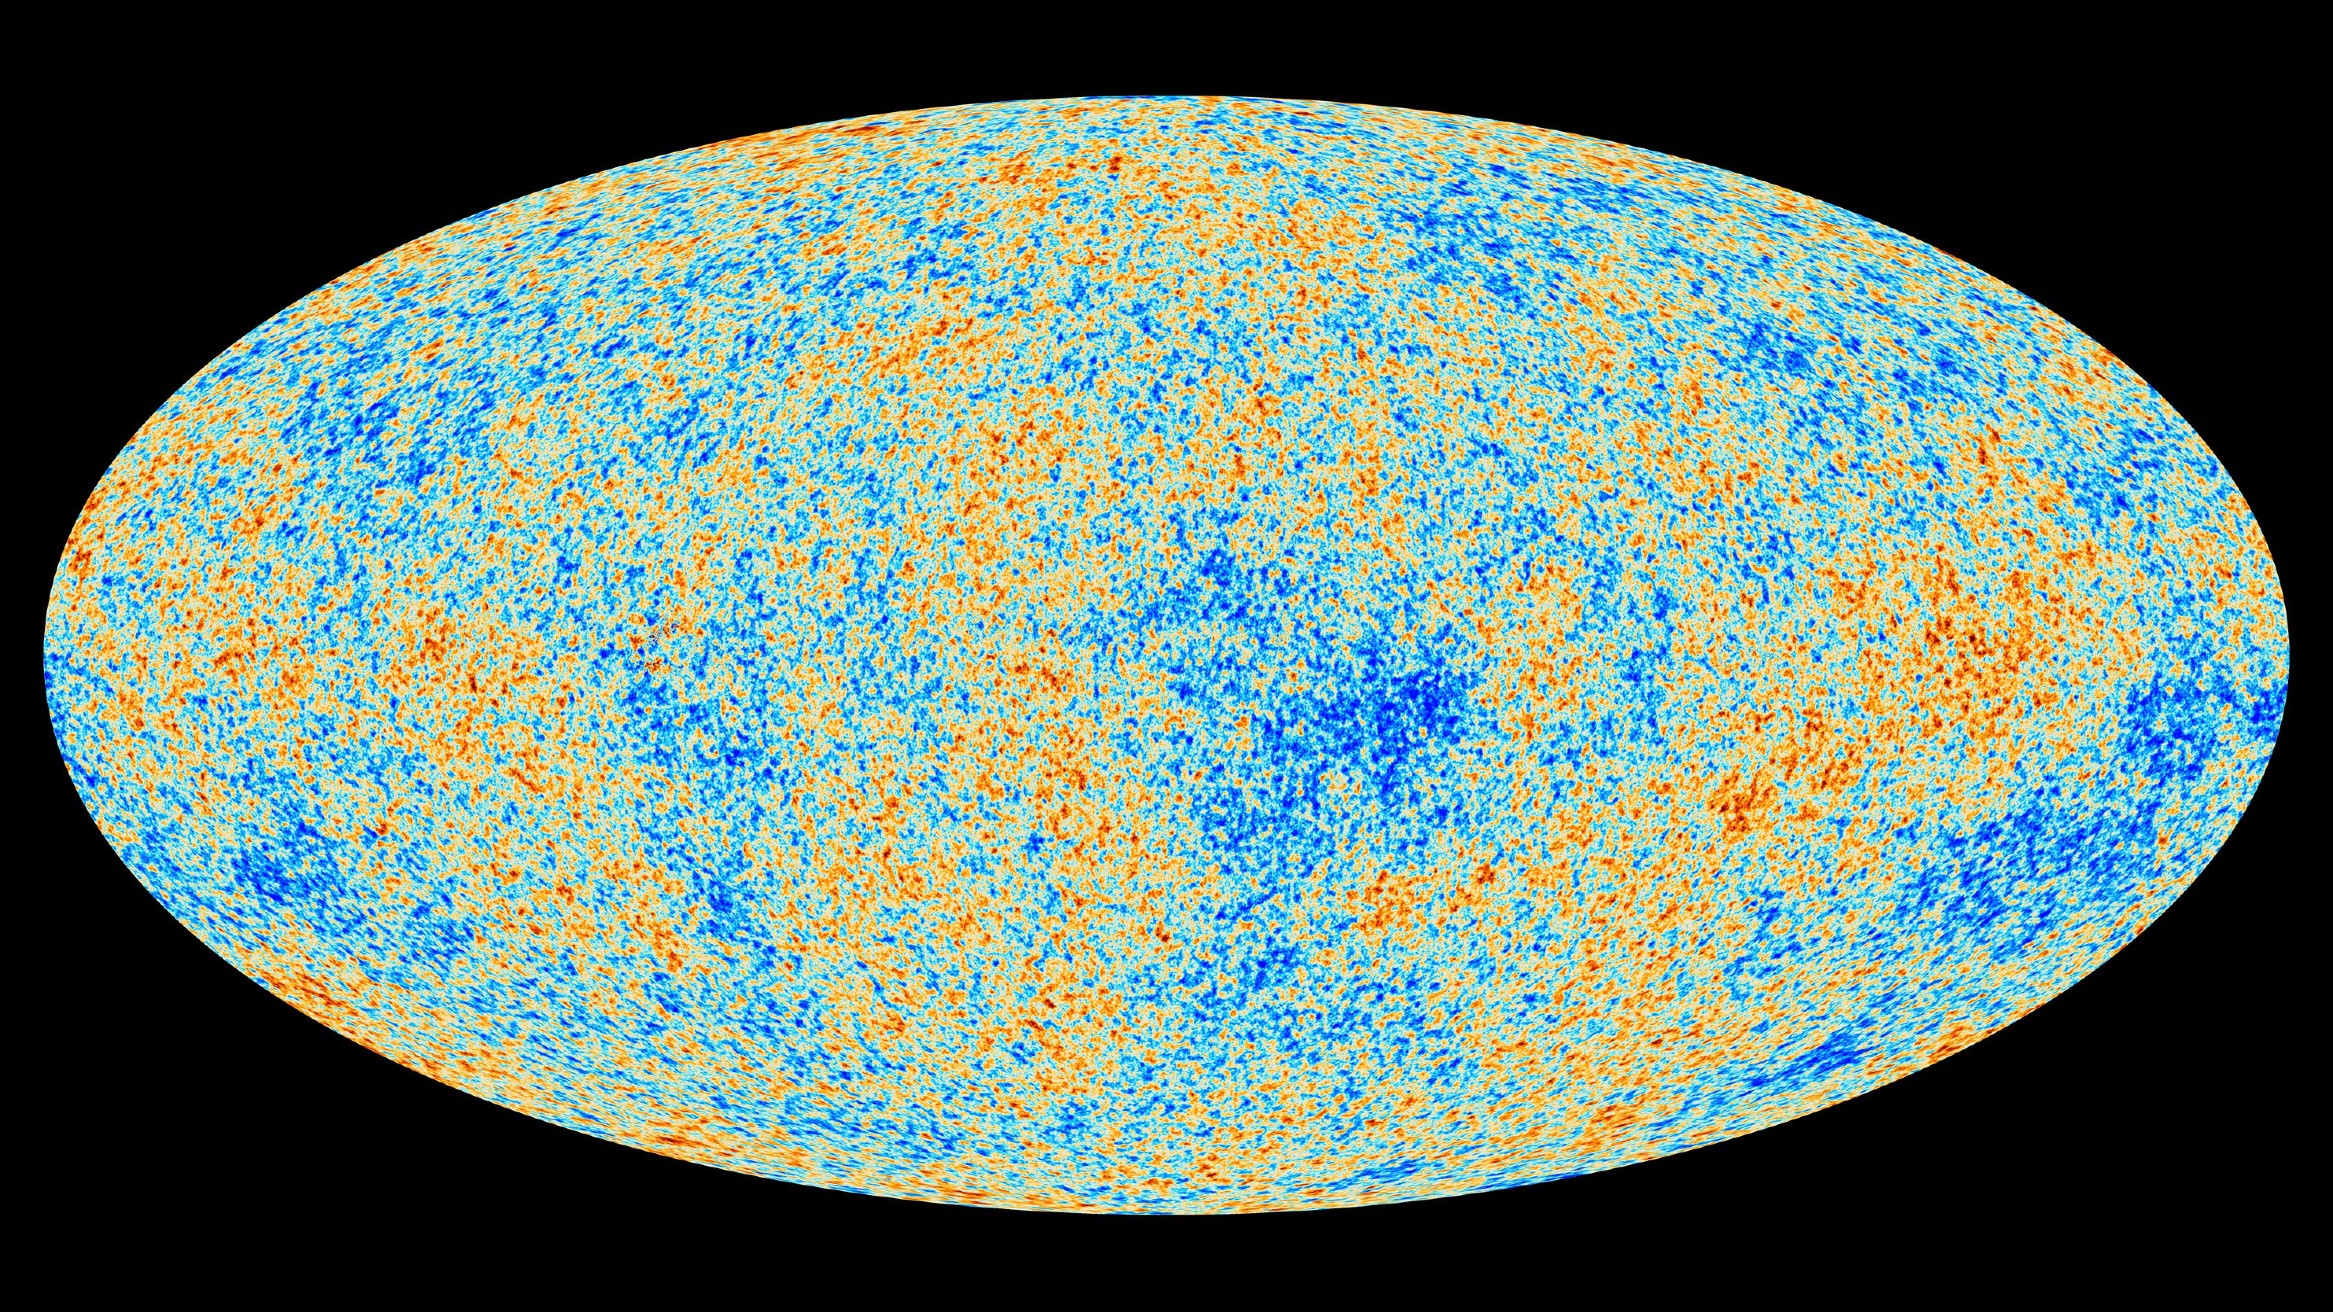 The cosmic microwave background as seen from the Planck satellite